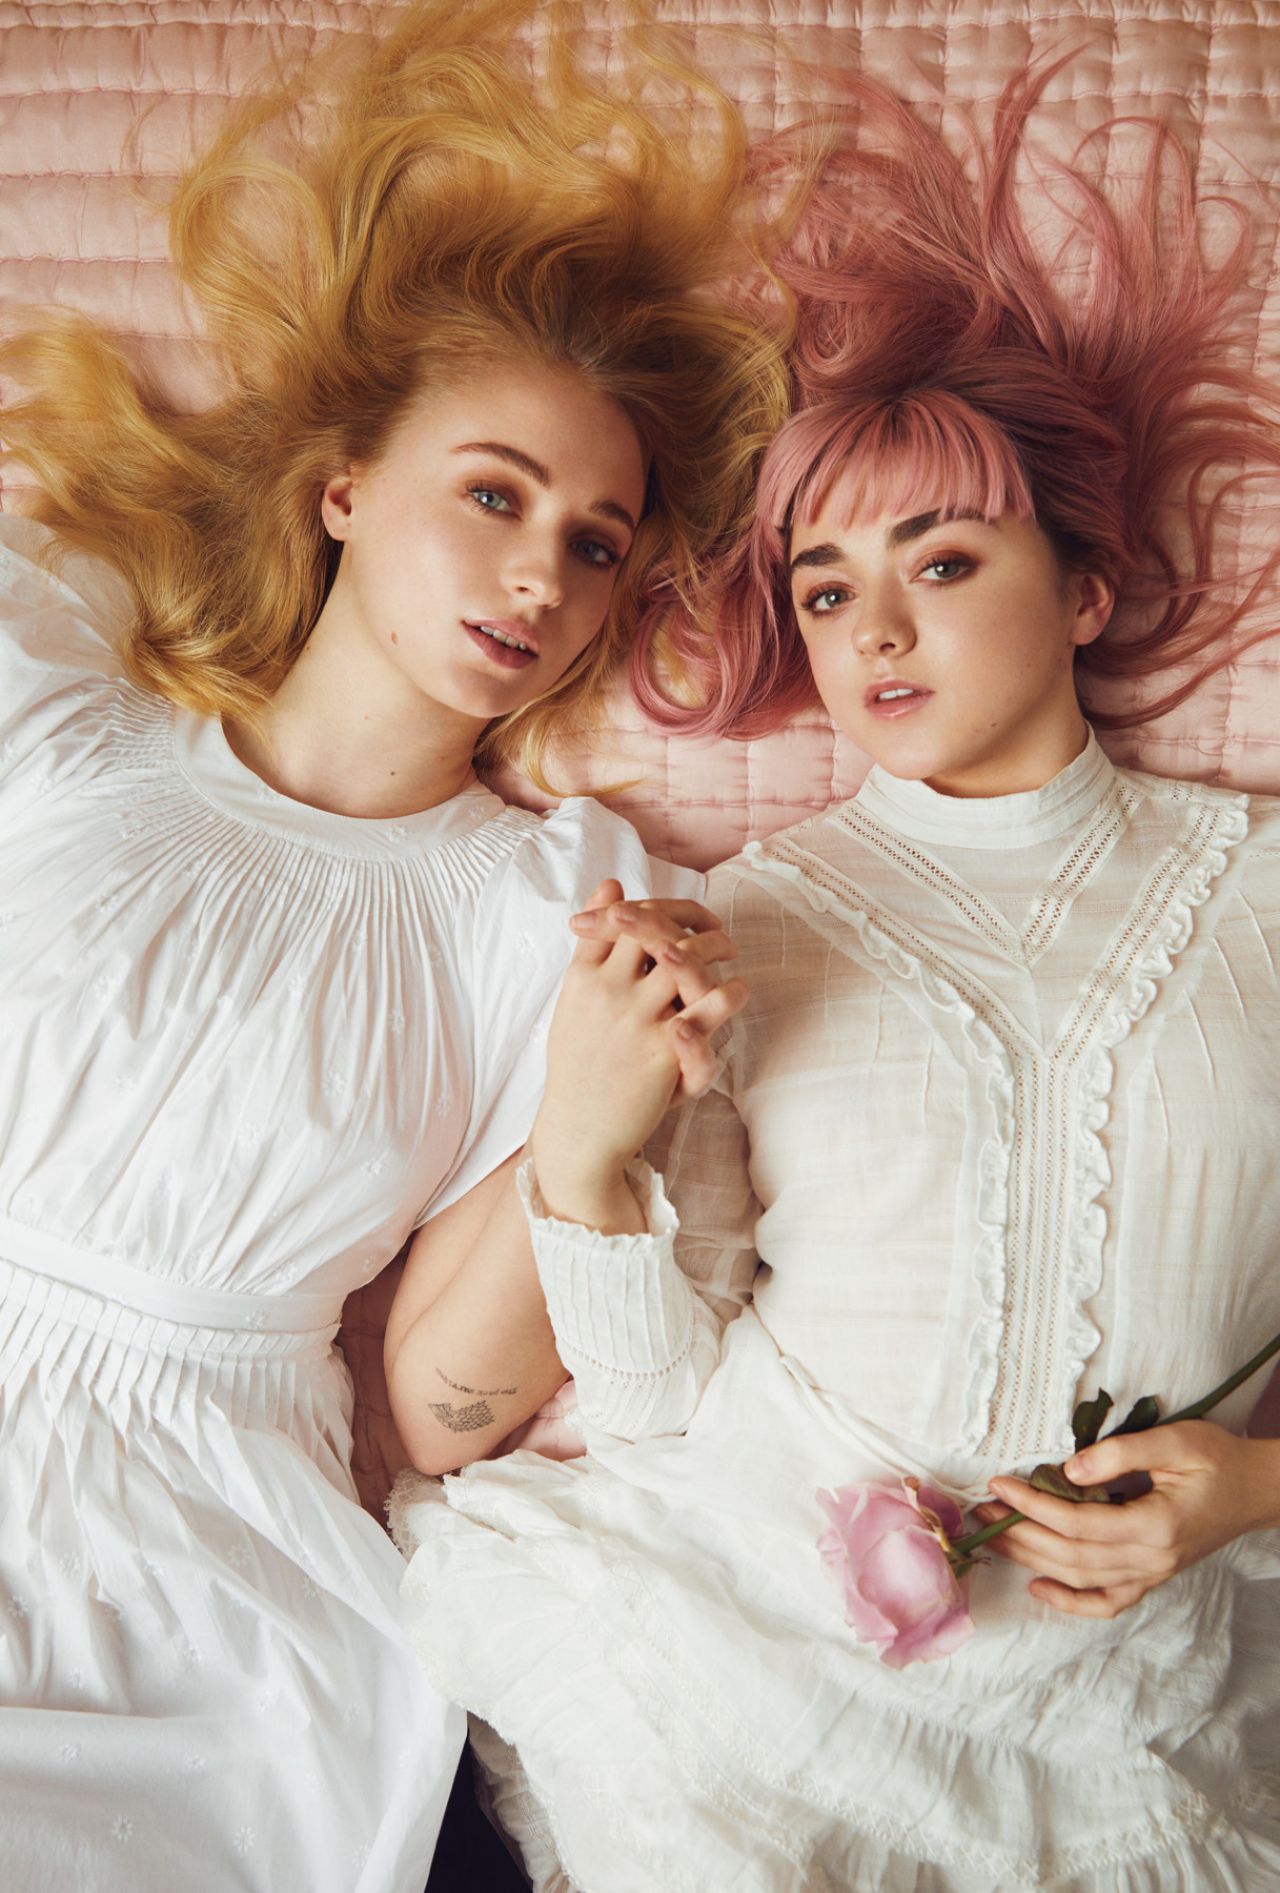 Maisie Williams And Sophie Turner Rolling Stone Magazine April 2019